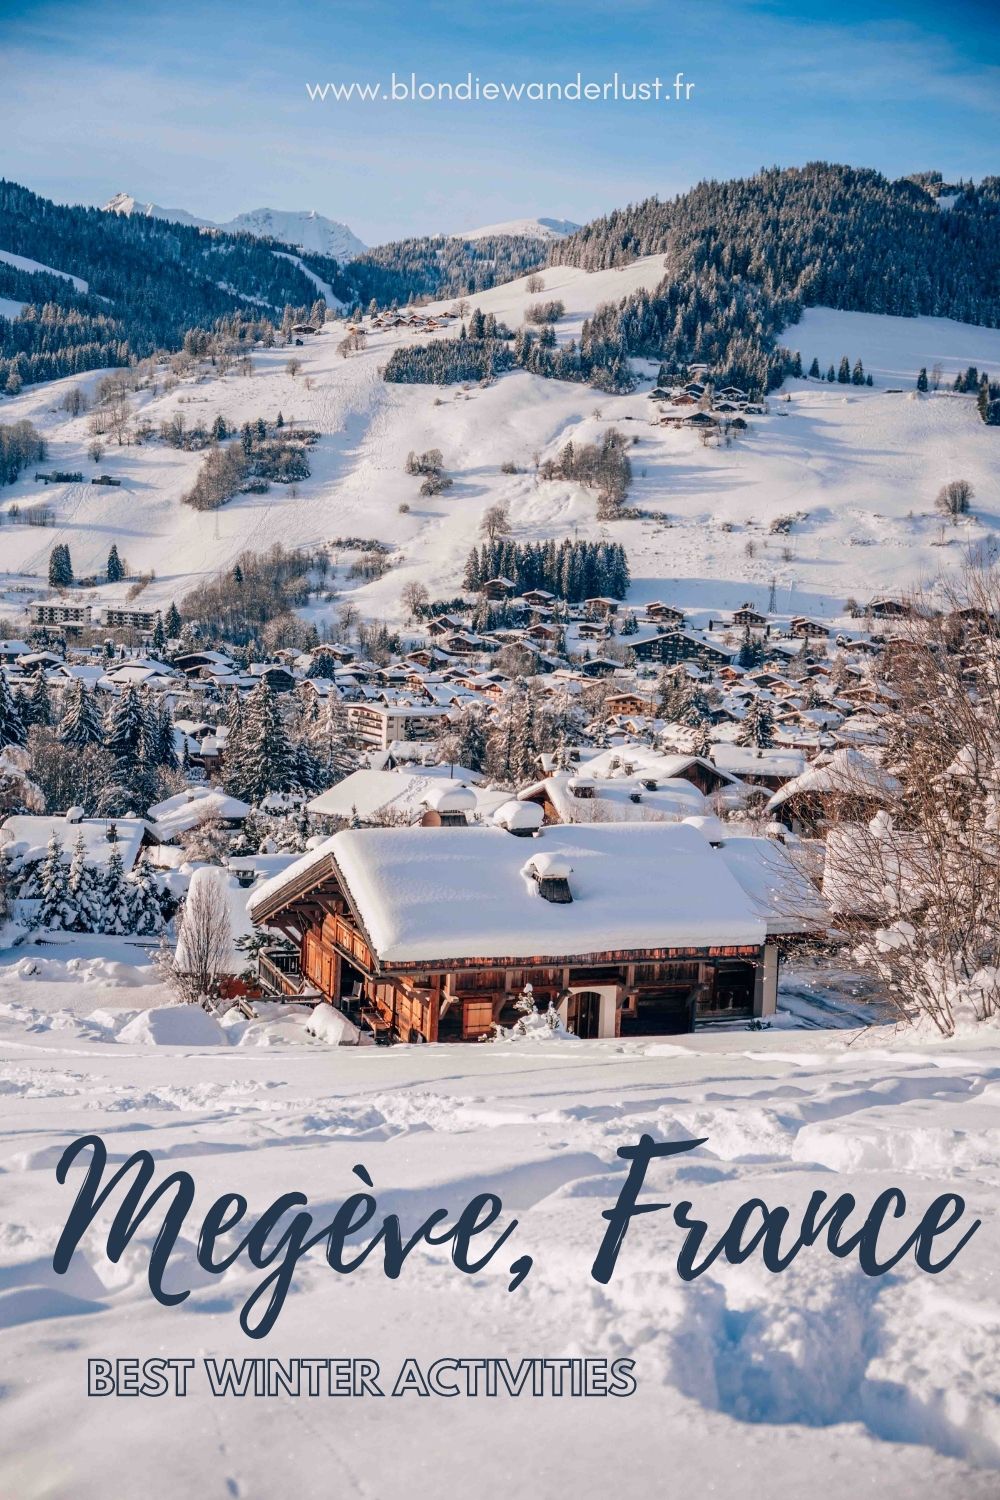 Best winter activities in the French Alps